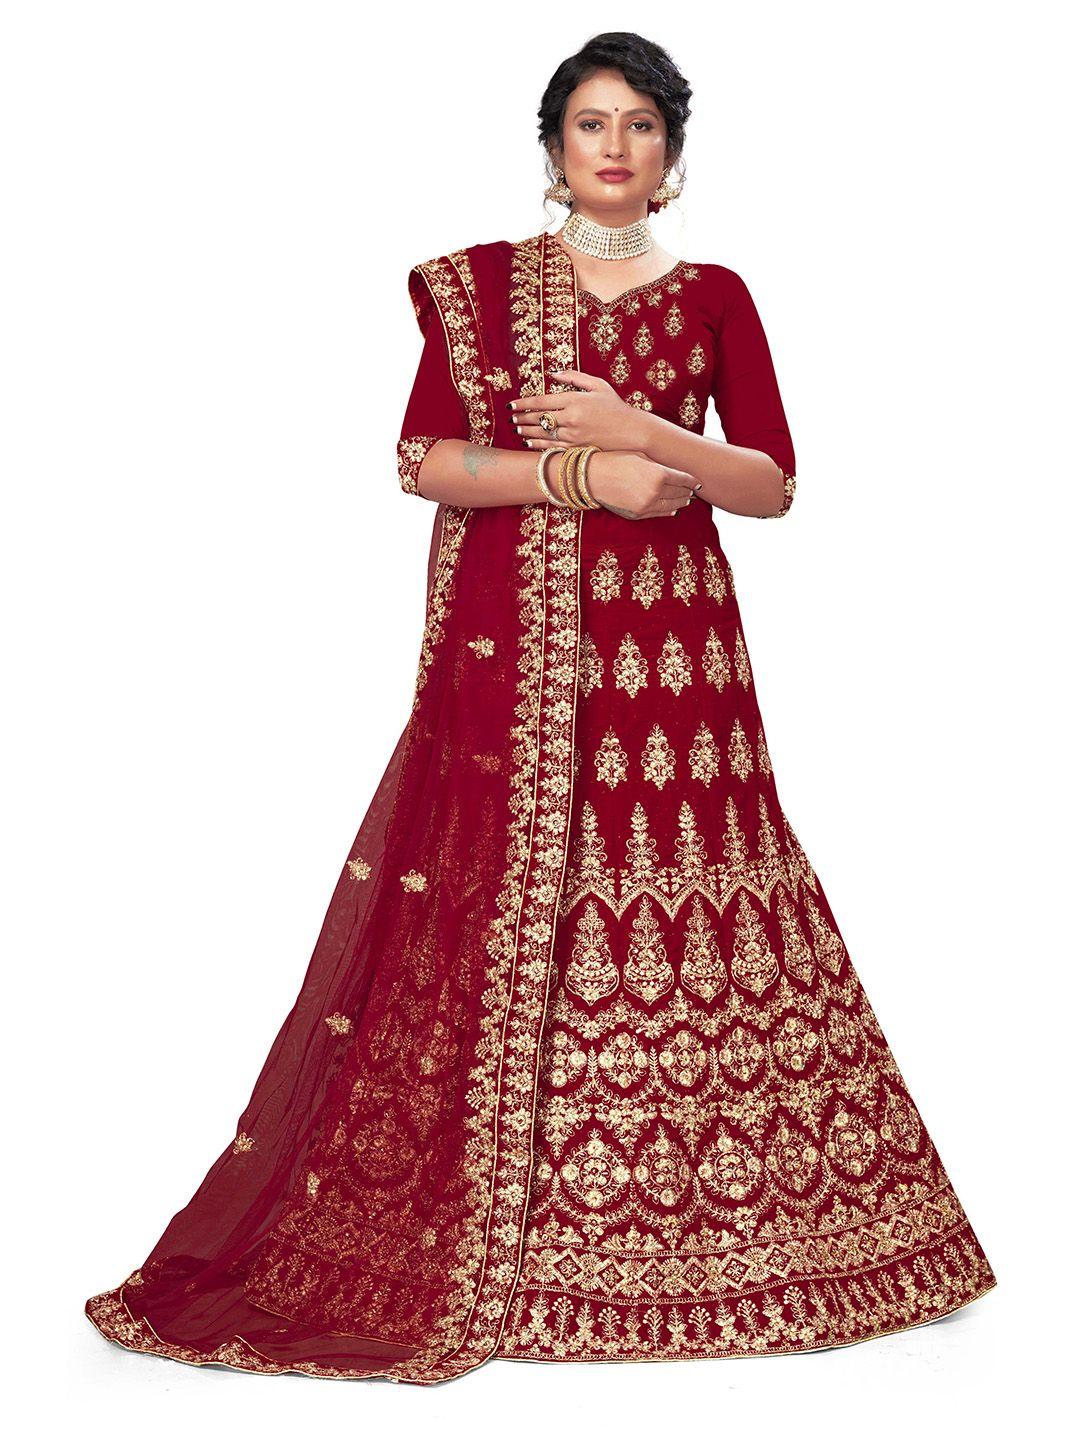 MANVAA Ethnic Motif Embroidered Semi-Stitched Lehenga & Unstitched Blouse With